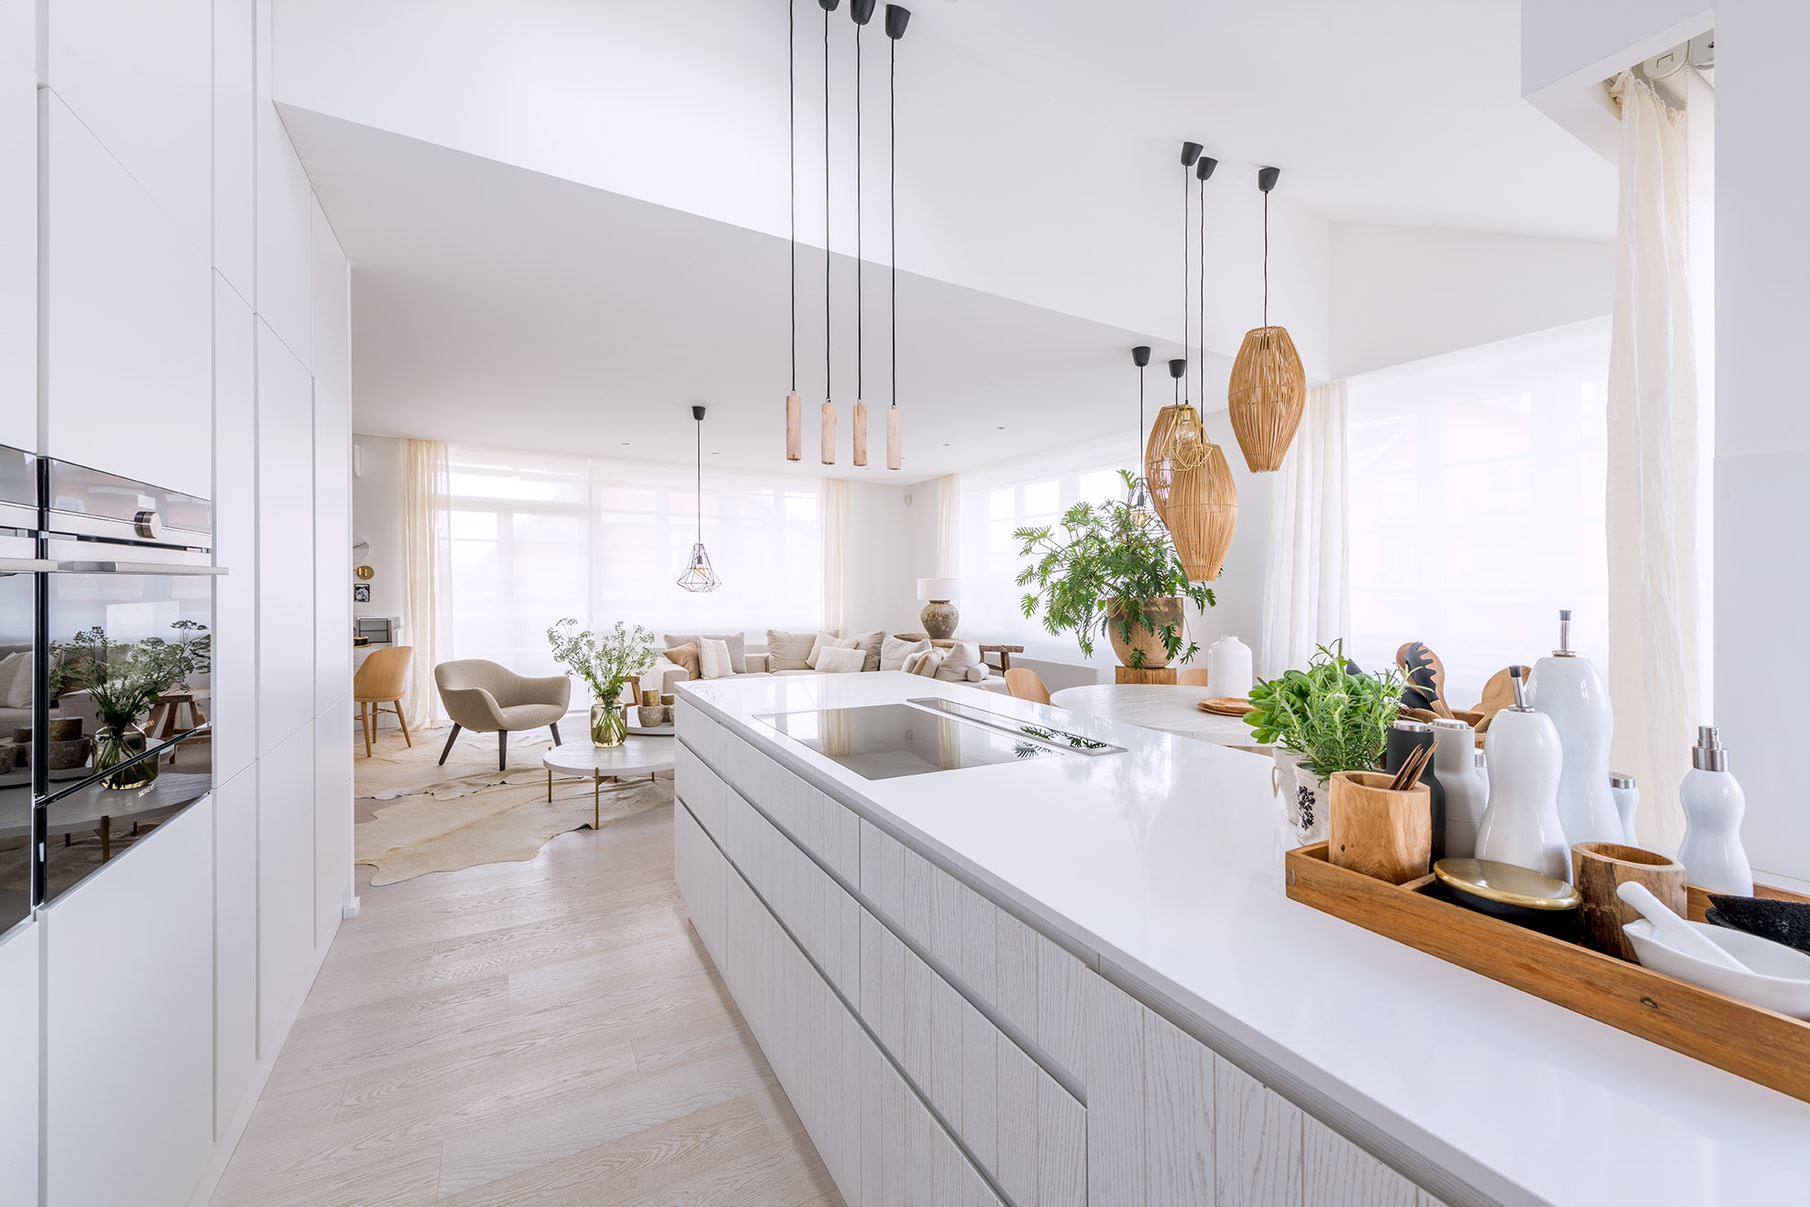 A Kitchen in Norway, Inspiring Interiors